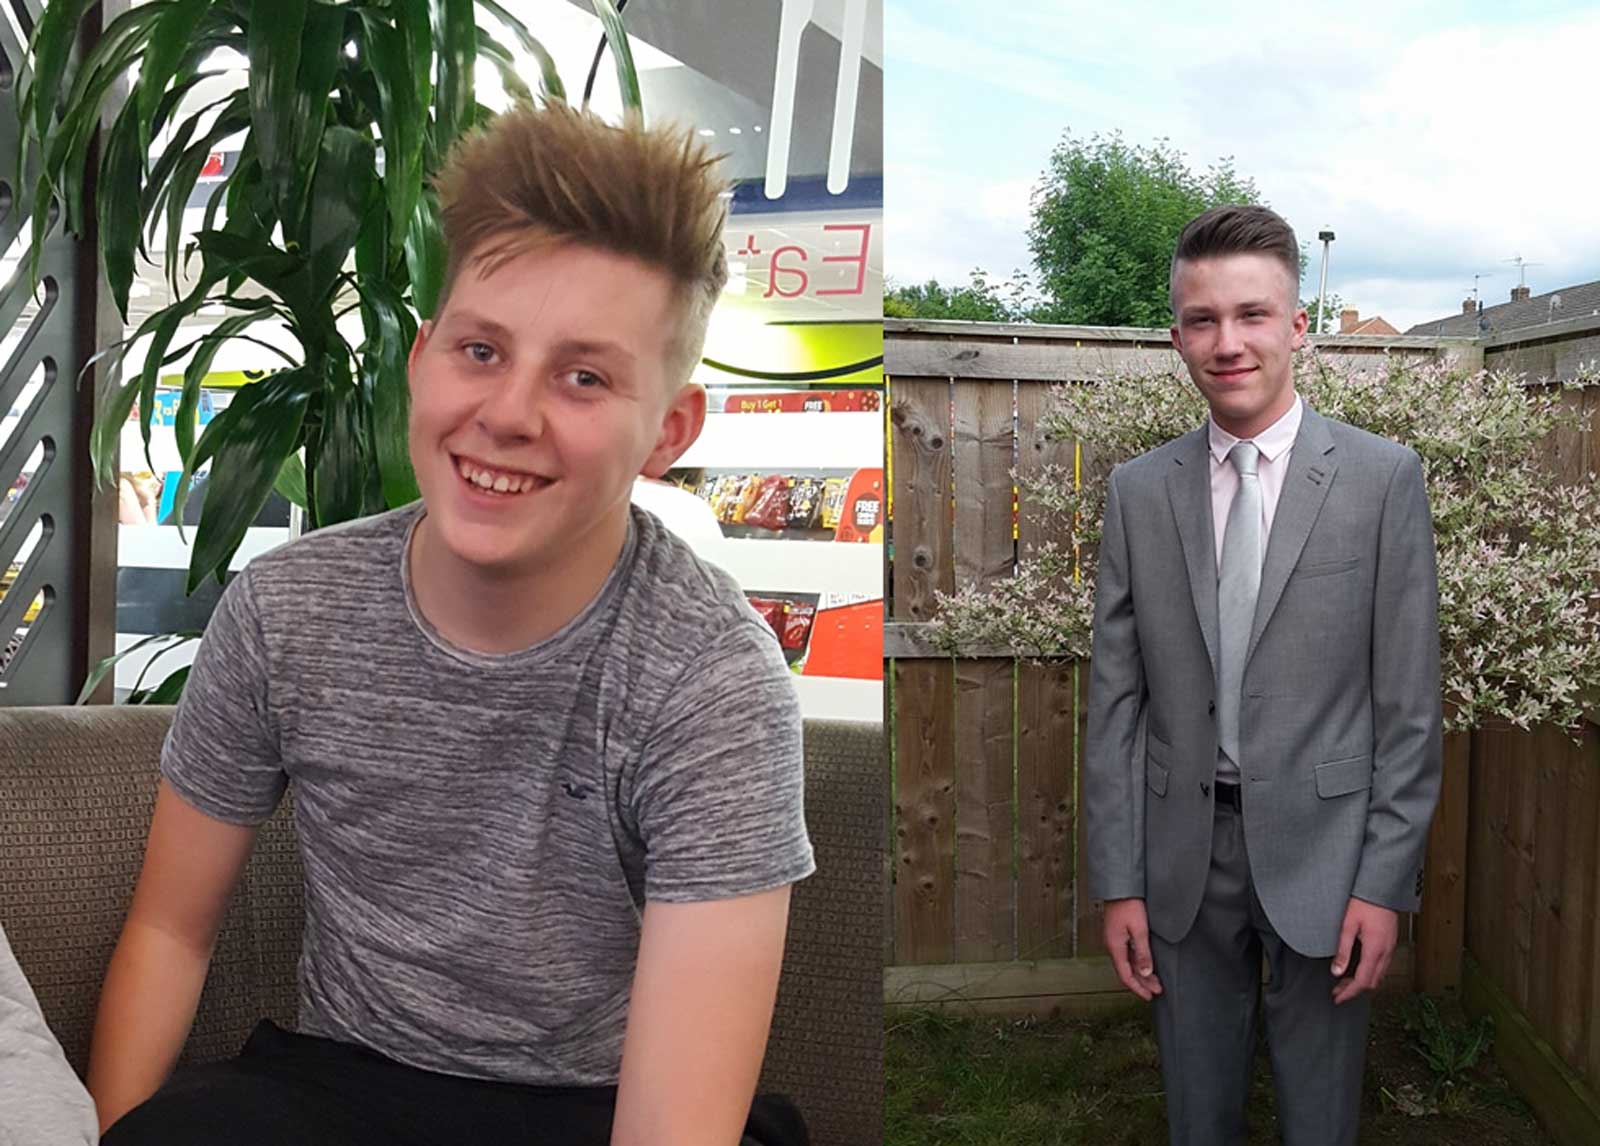 George Thomas Turner, 17, from Sowerby, and Mason Pearson, also 17, from Thirsk